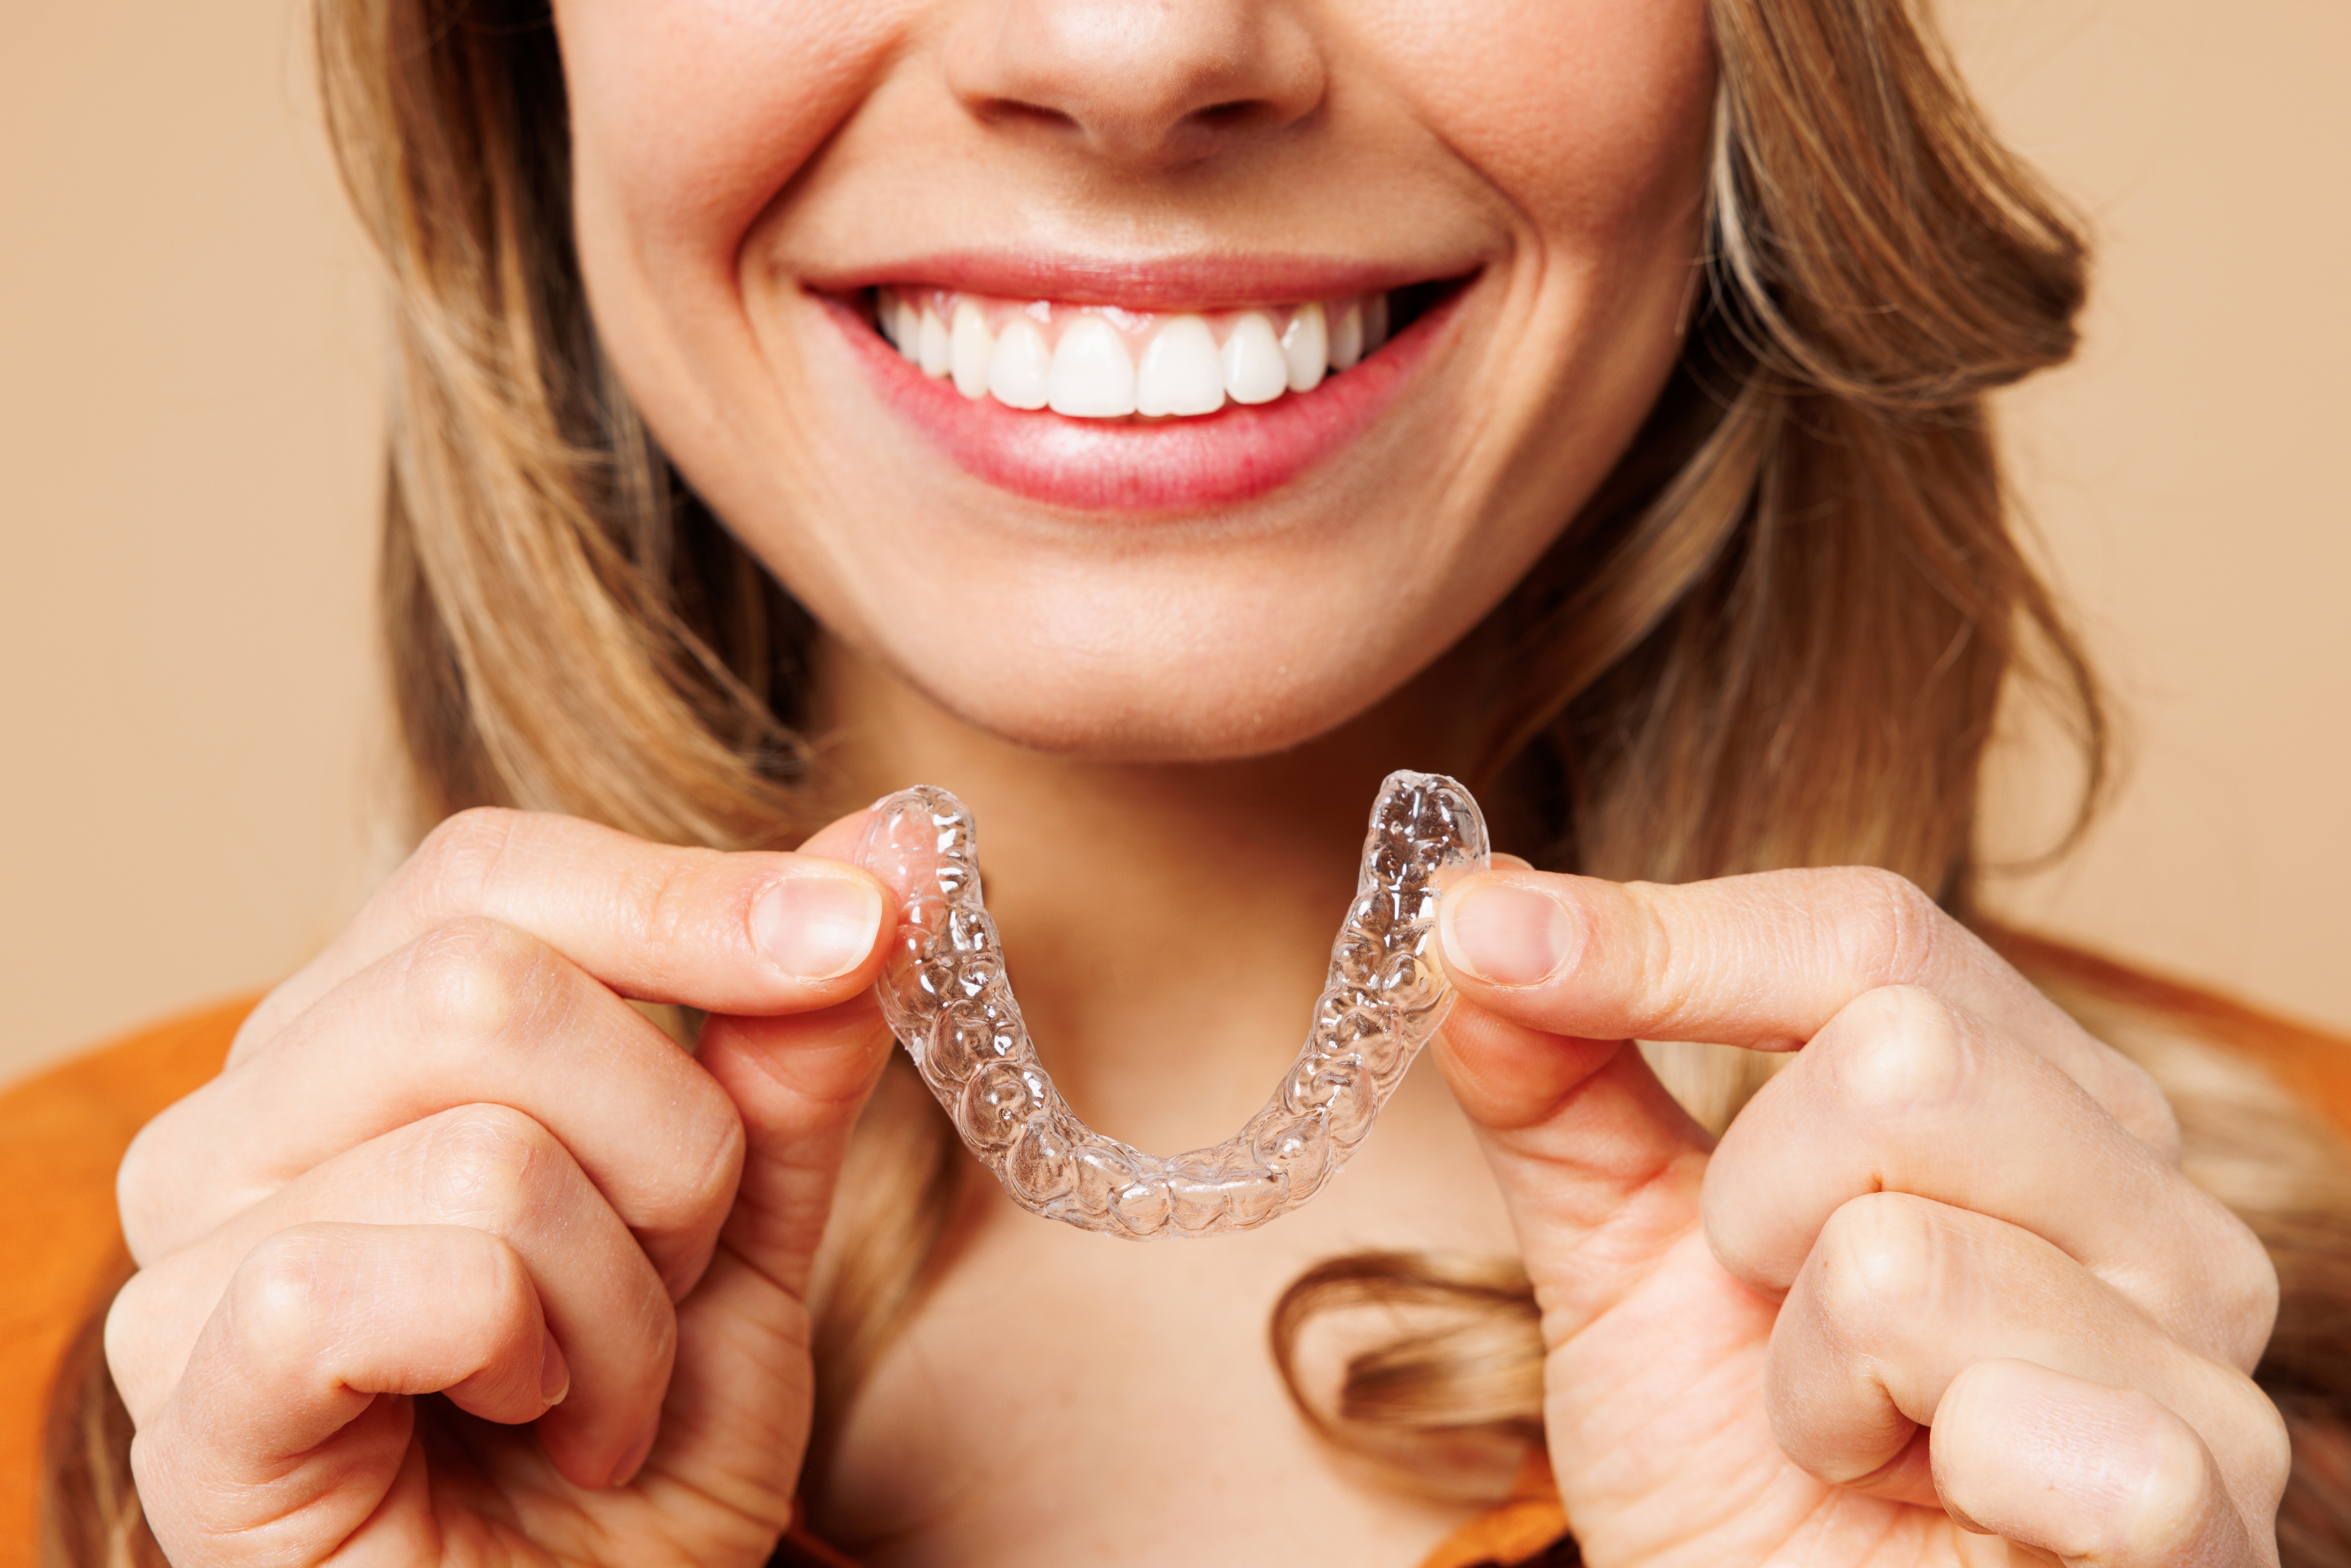 Adult woman smiles after completing her 9 months of Invisalign treatment for a straight, aligned teeth.